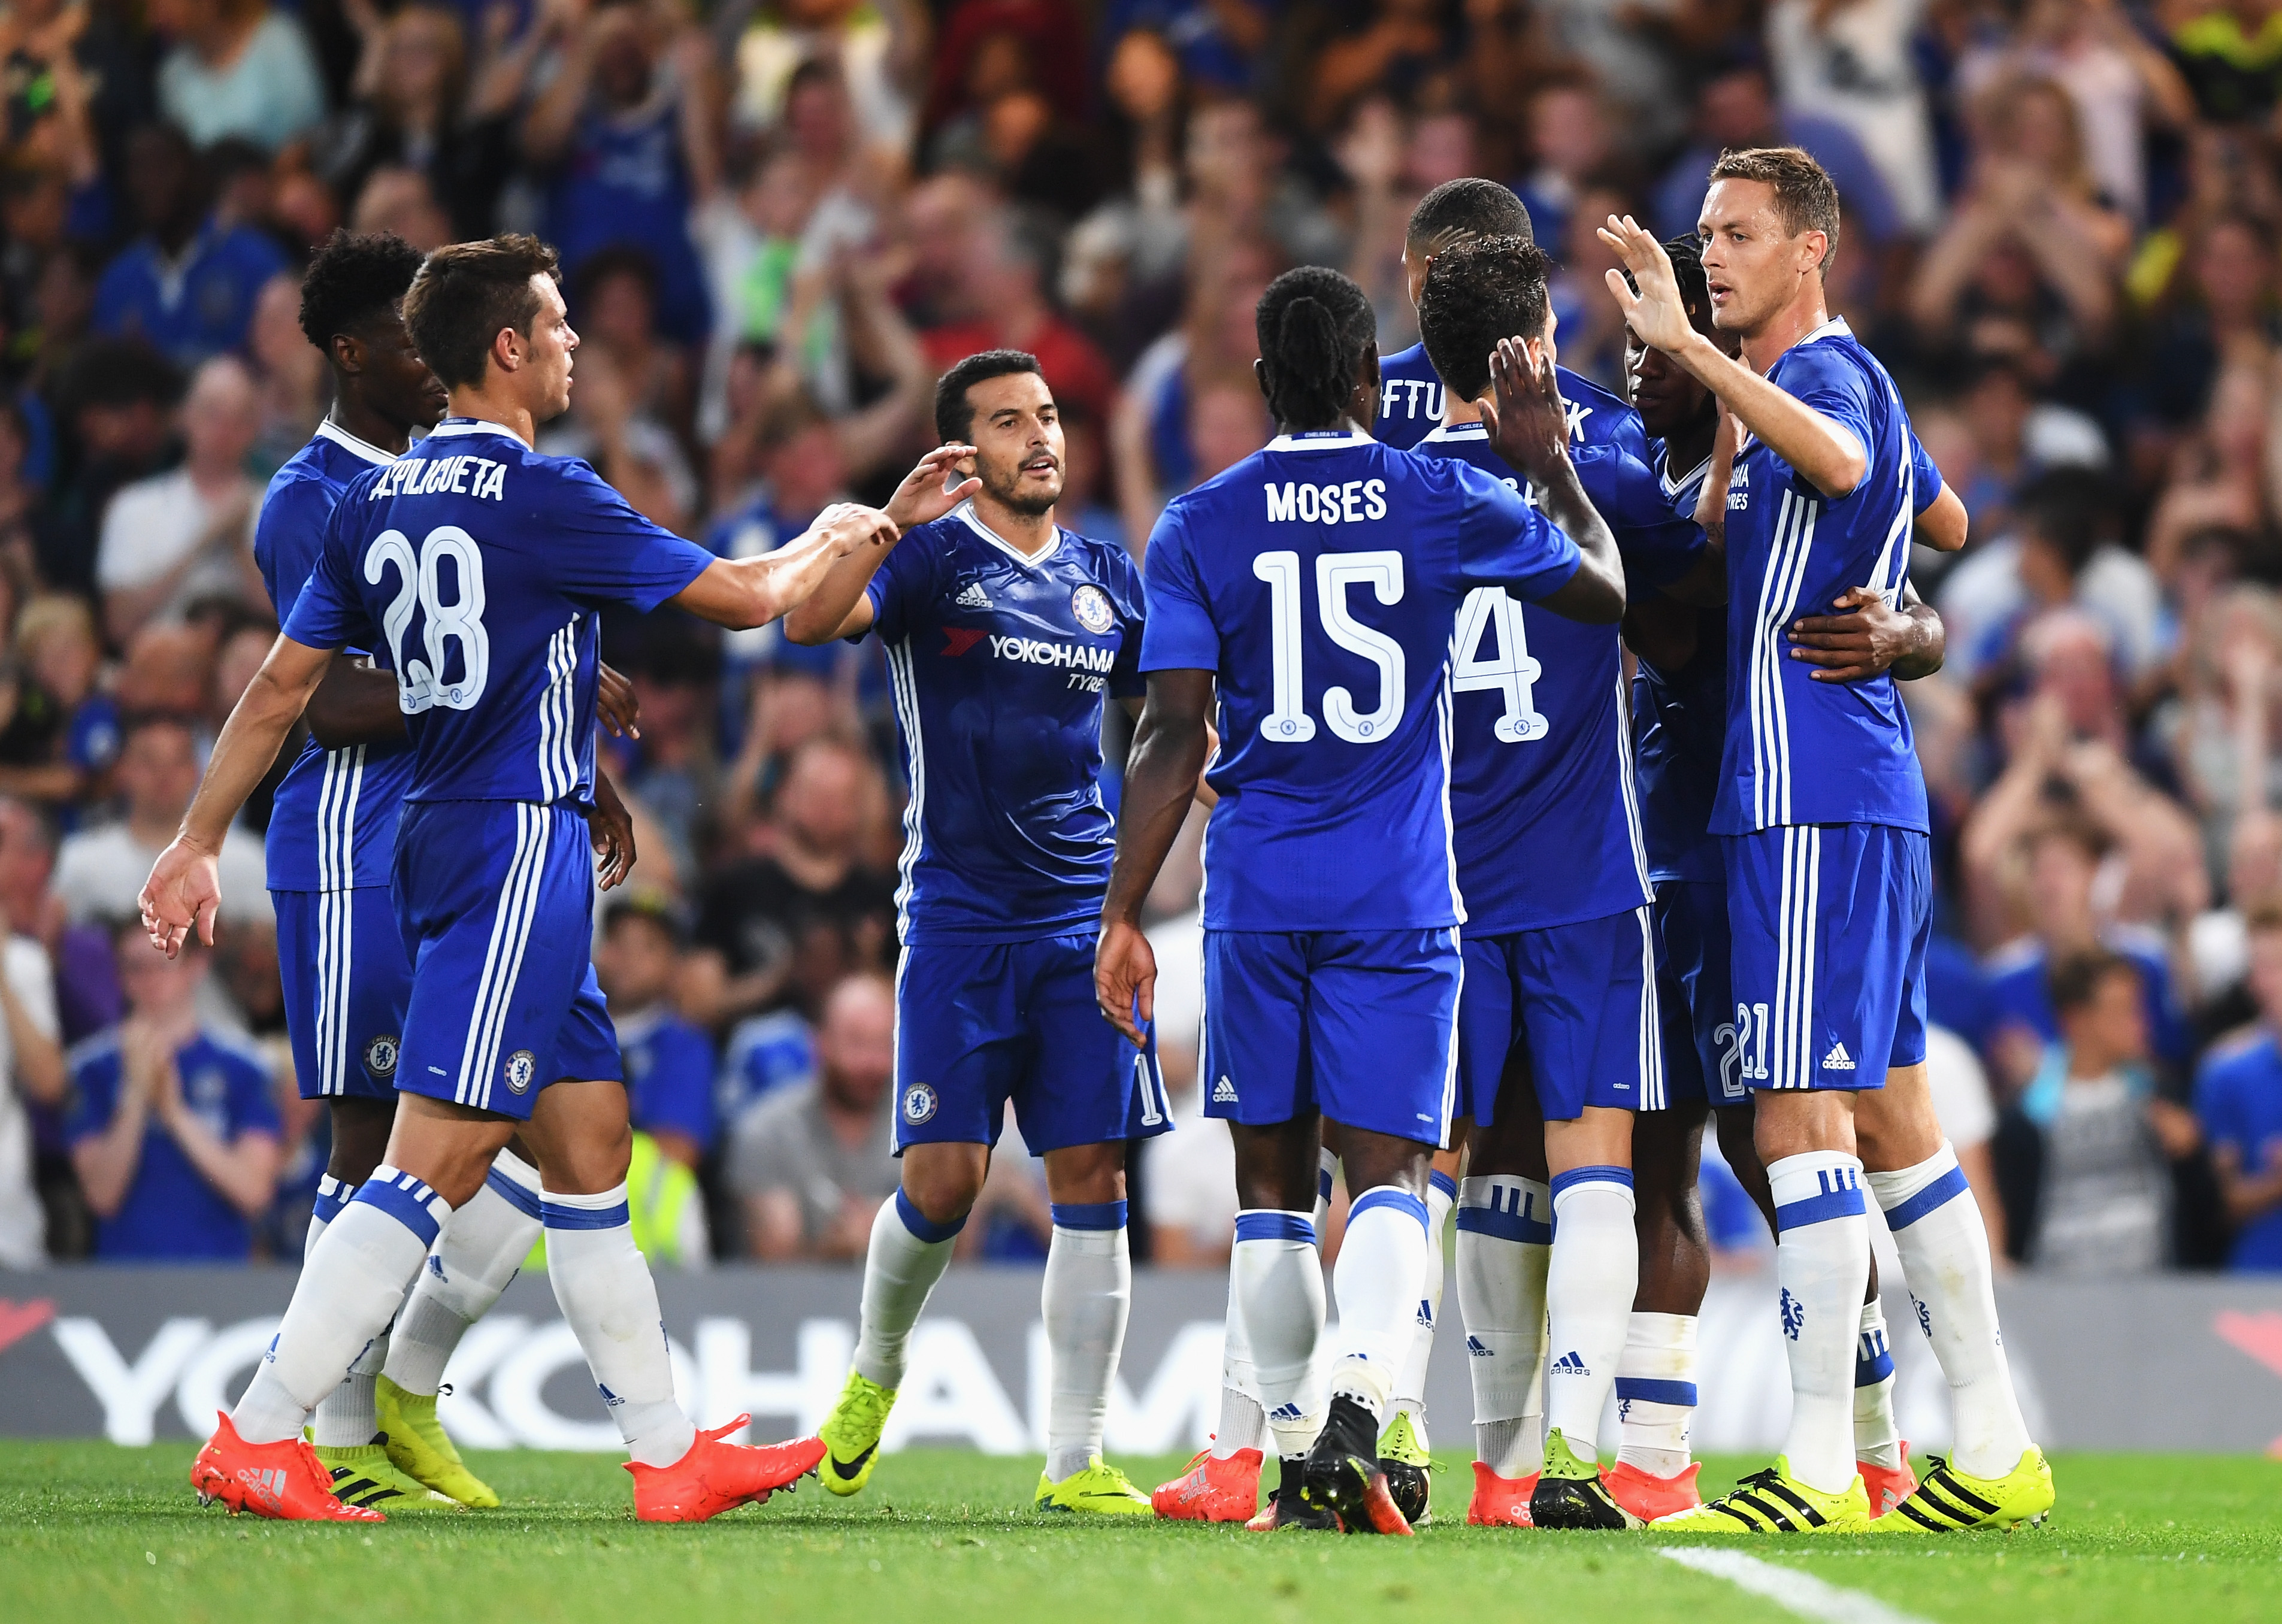 LONDON, ENGLAND - AUGUST 23: Chelsea players celebrate the opening goal scored by Michy Batshuayi during the EFL Cup second round match between Chelsea and Bristol Rovers at Stamford Bridge on August 23, 2016 in London, England.  (Photo by Michael Regan/Getty Images )